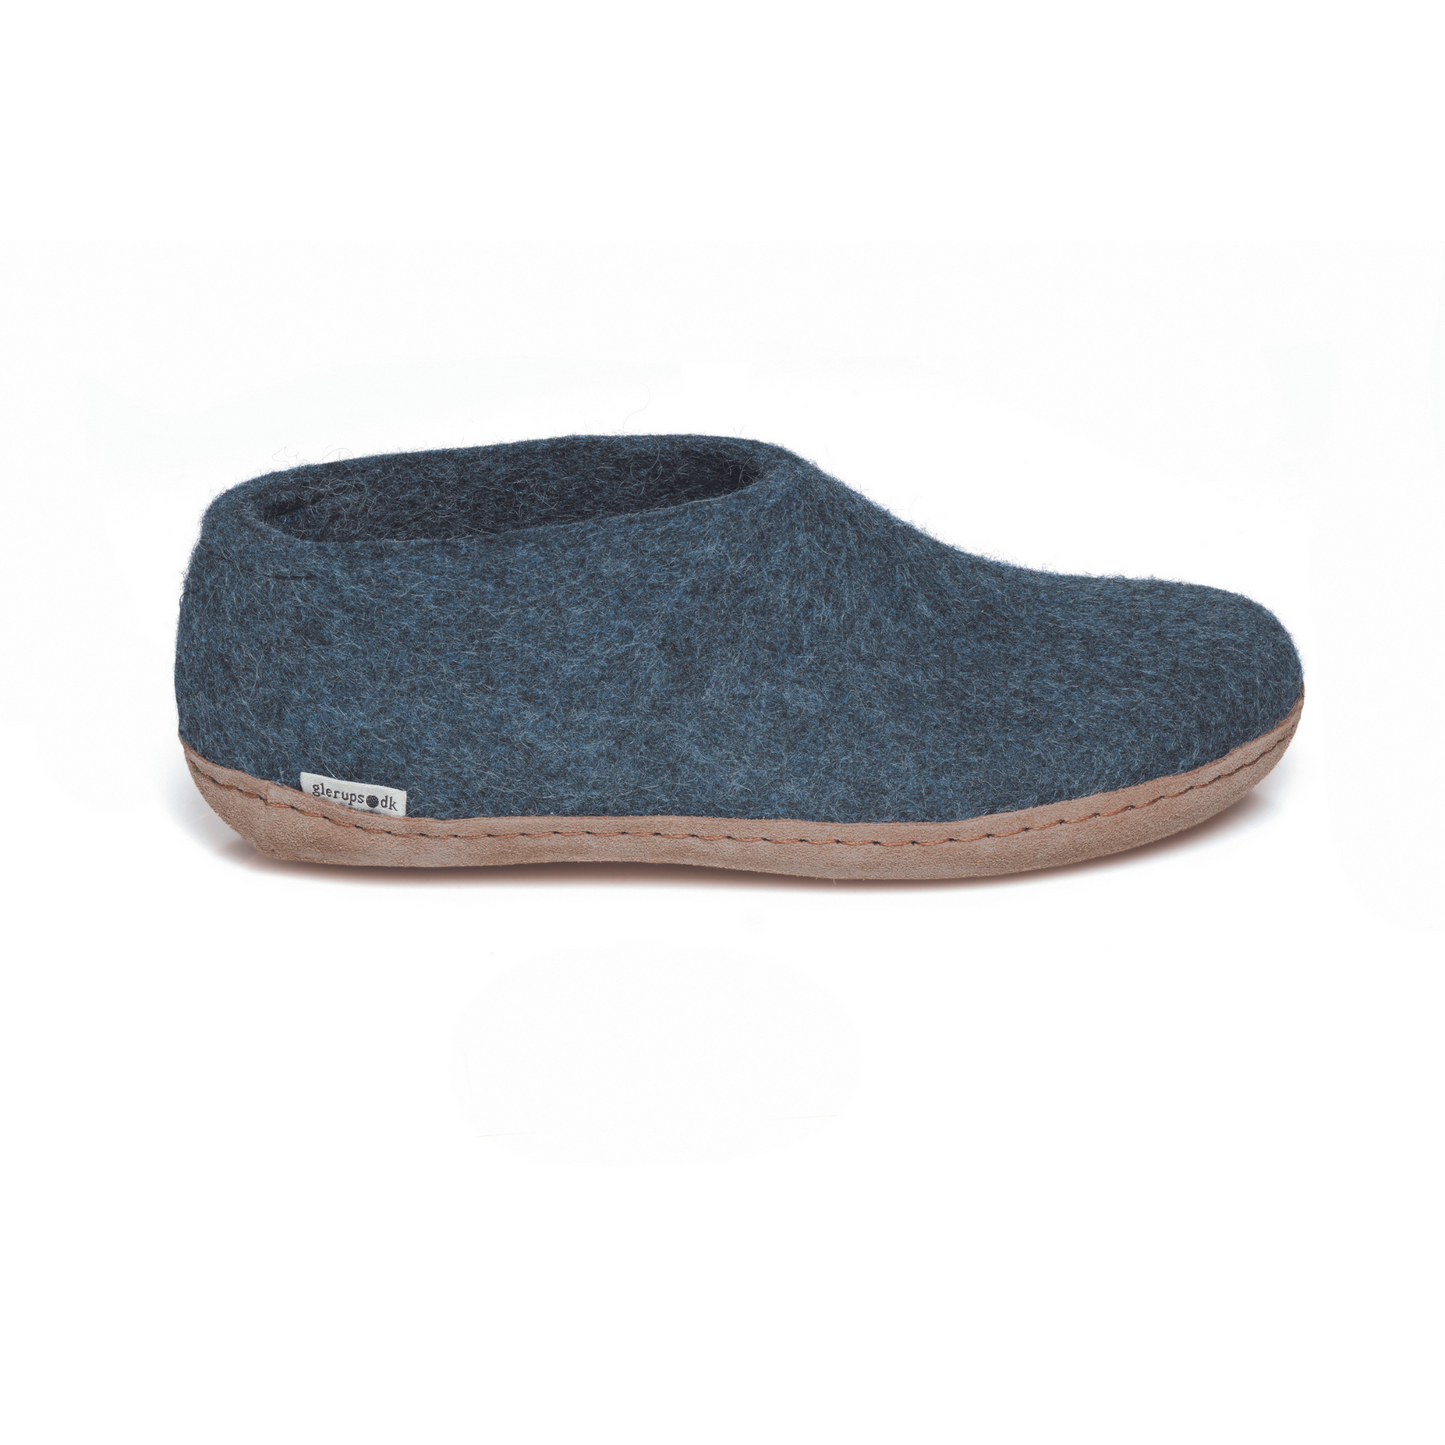 A dark denim-blue slipper is pictured in profile, showing the high back of the heel. The bottom lined in tan leather has a small tag with the brand name attached in the seam where the leather meets the felted wool.